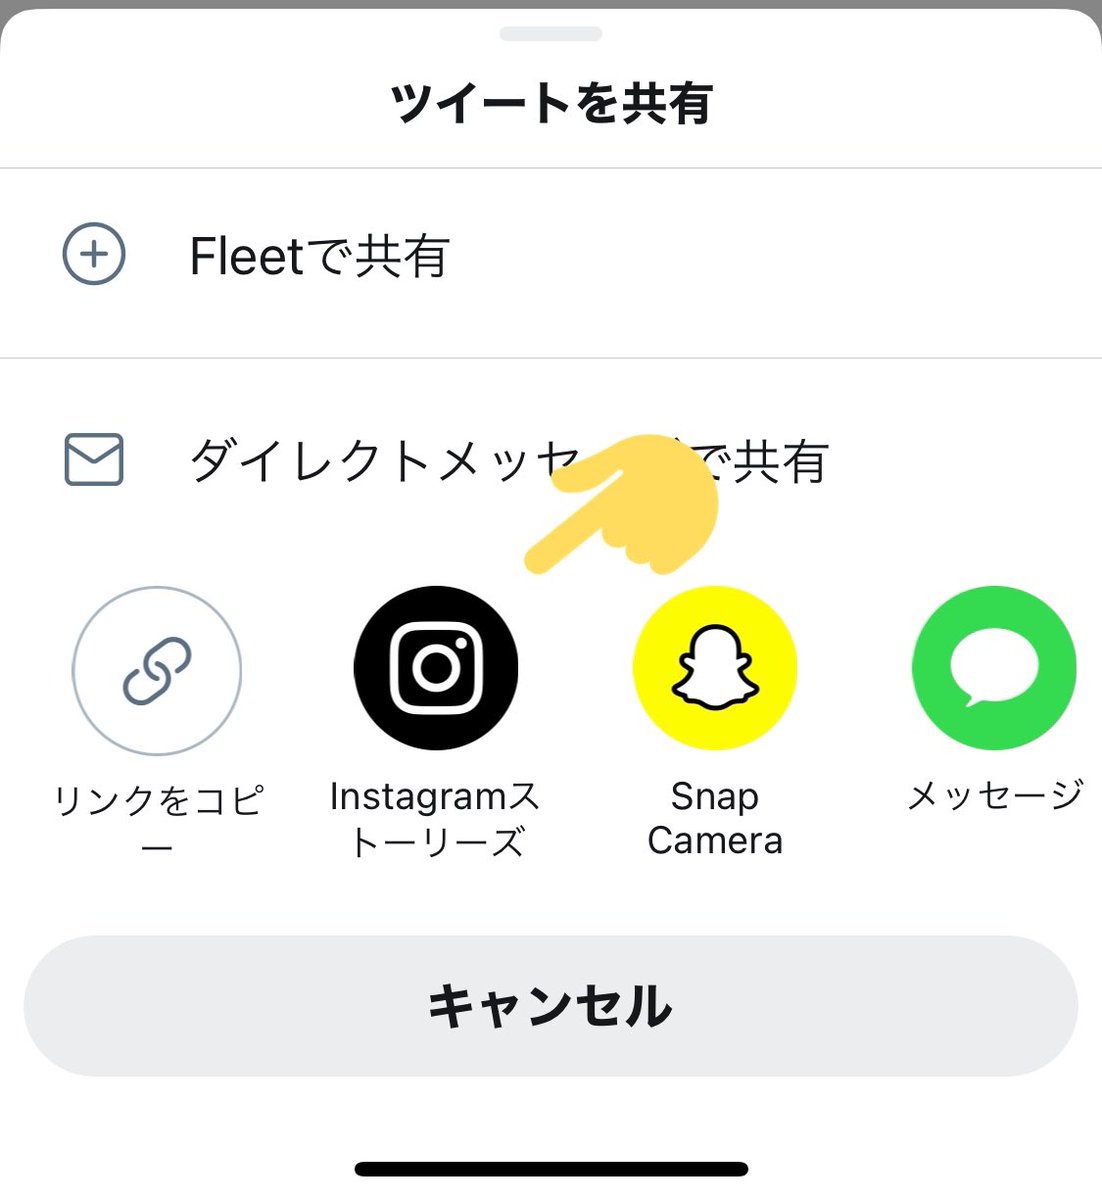 Twitter testing “Tweet share” to Instagram story. you can share tweets to Snapchat as sticker. Twitter new feature dec 2020